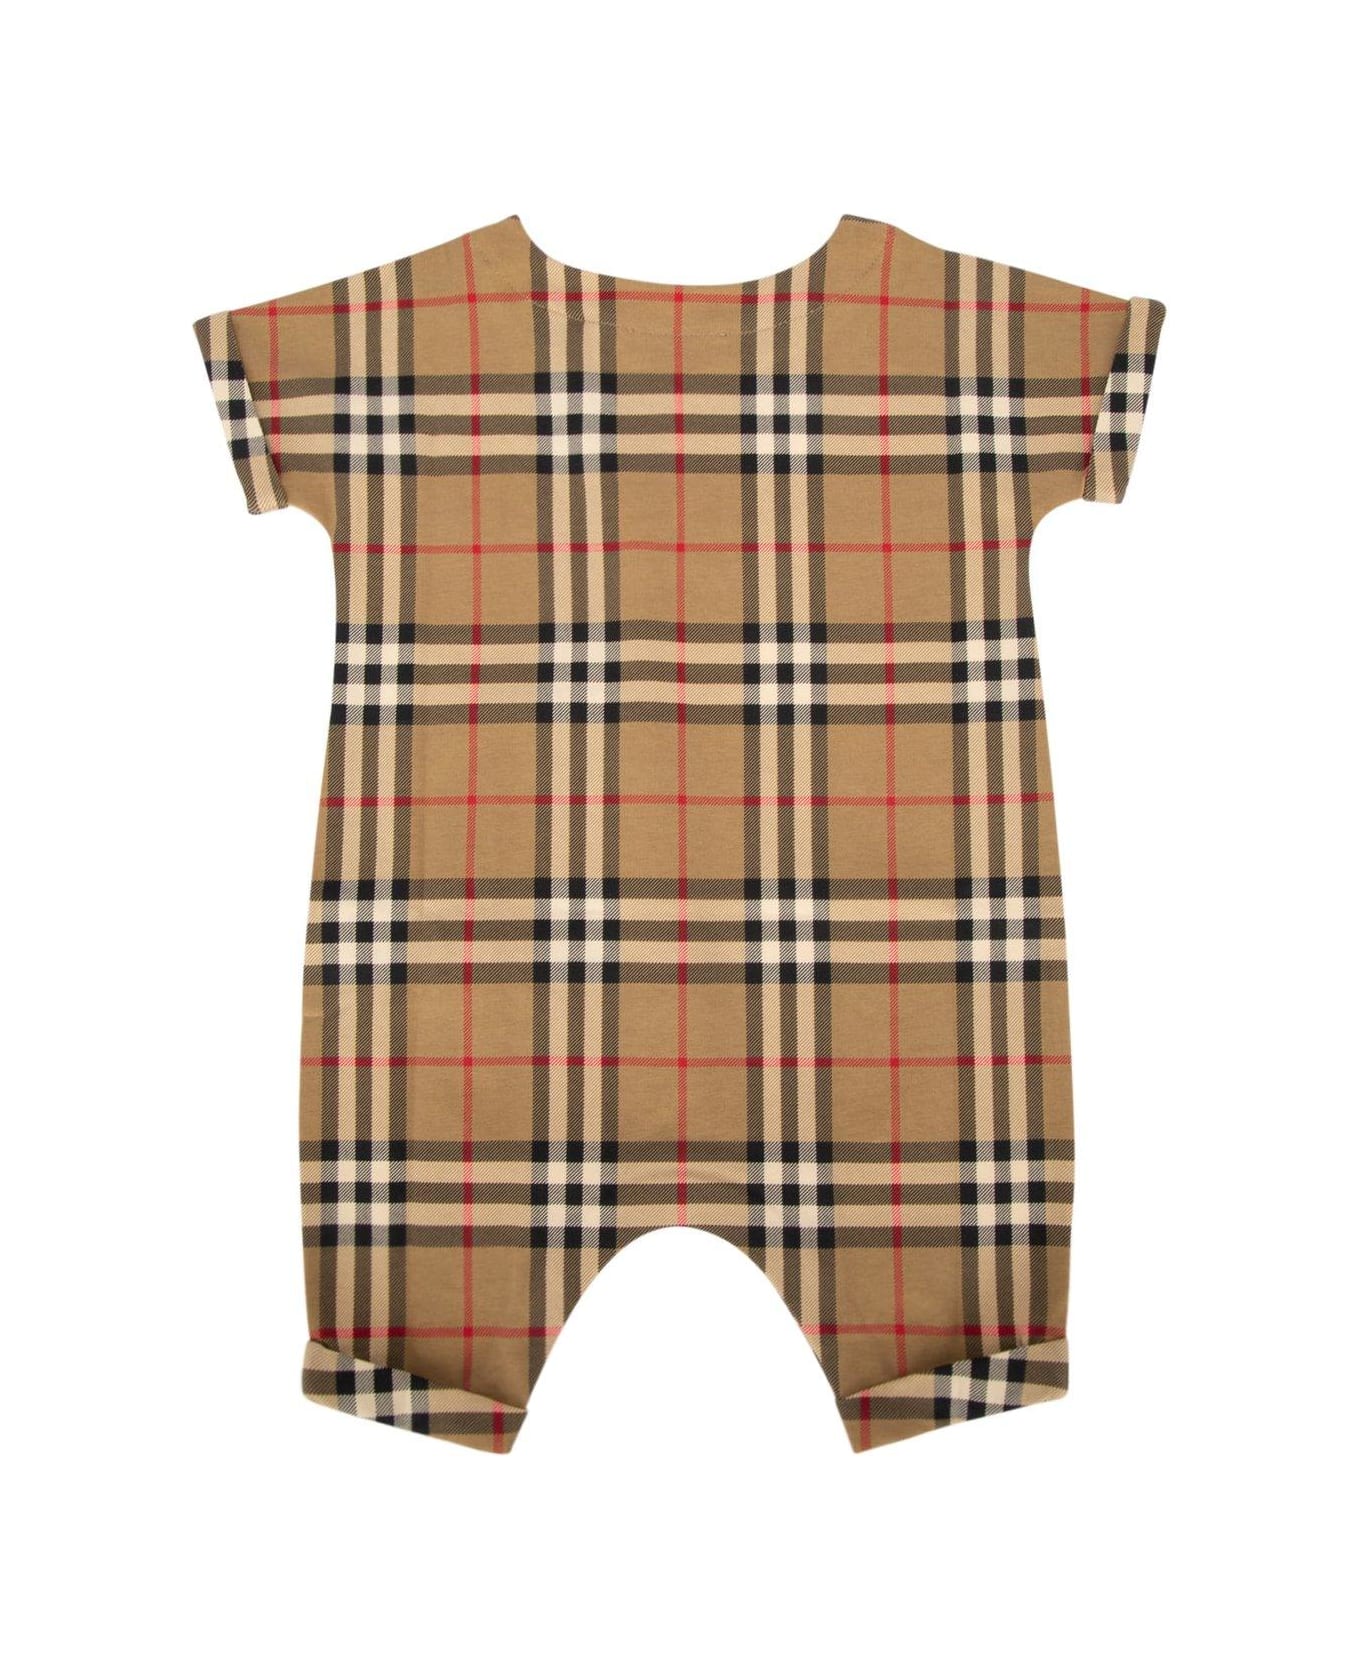 Burberry Checked Babygrow - Archive beige ip chk ボトムス